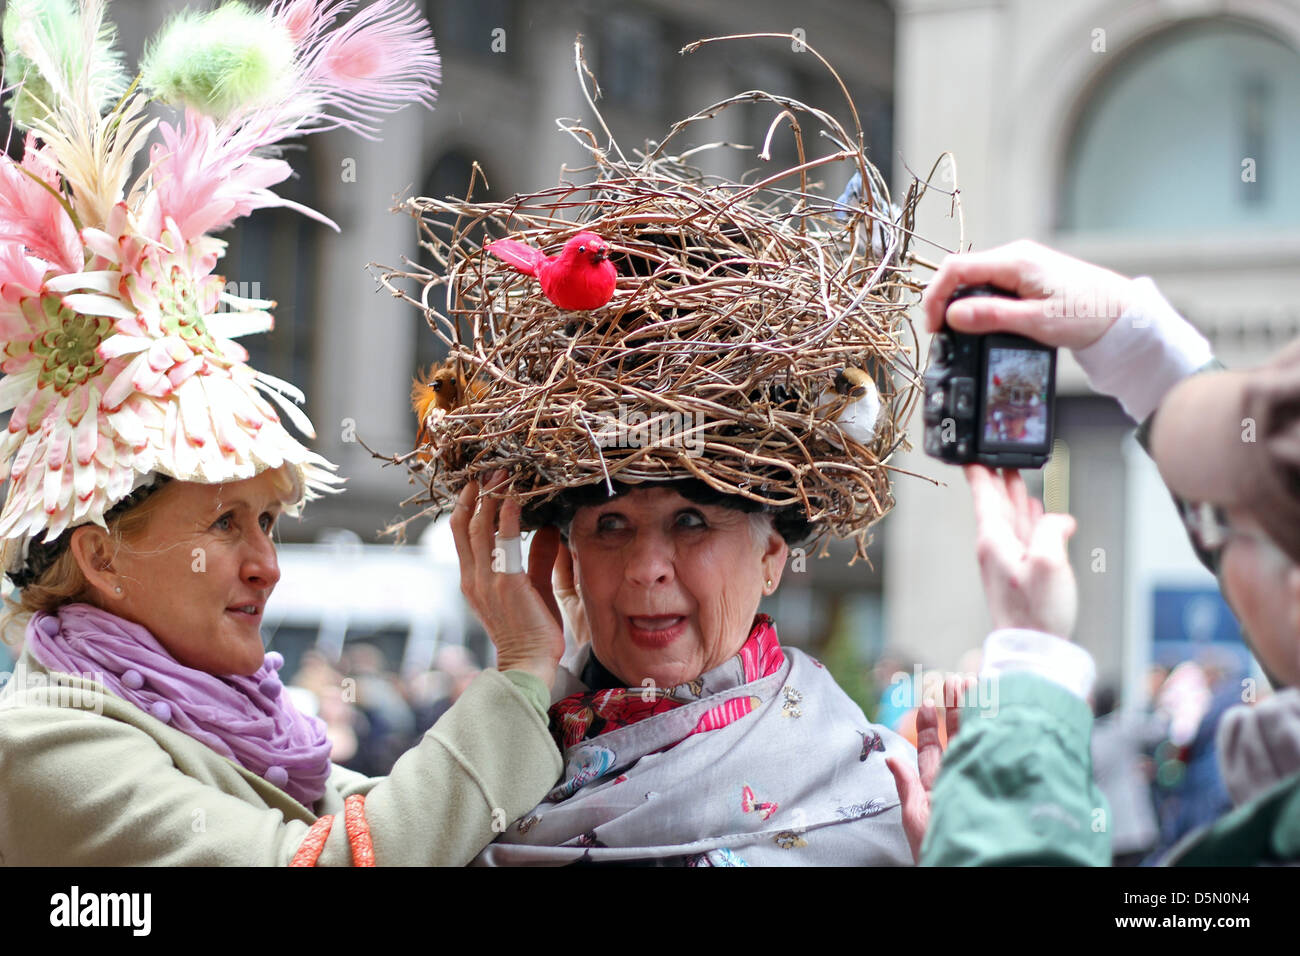 One woman adjusts another's hat, which resembles a bird's nest, as a man  takes a picture, at New York's City's Easter Parade Stock Photo